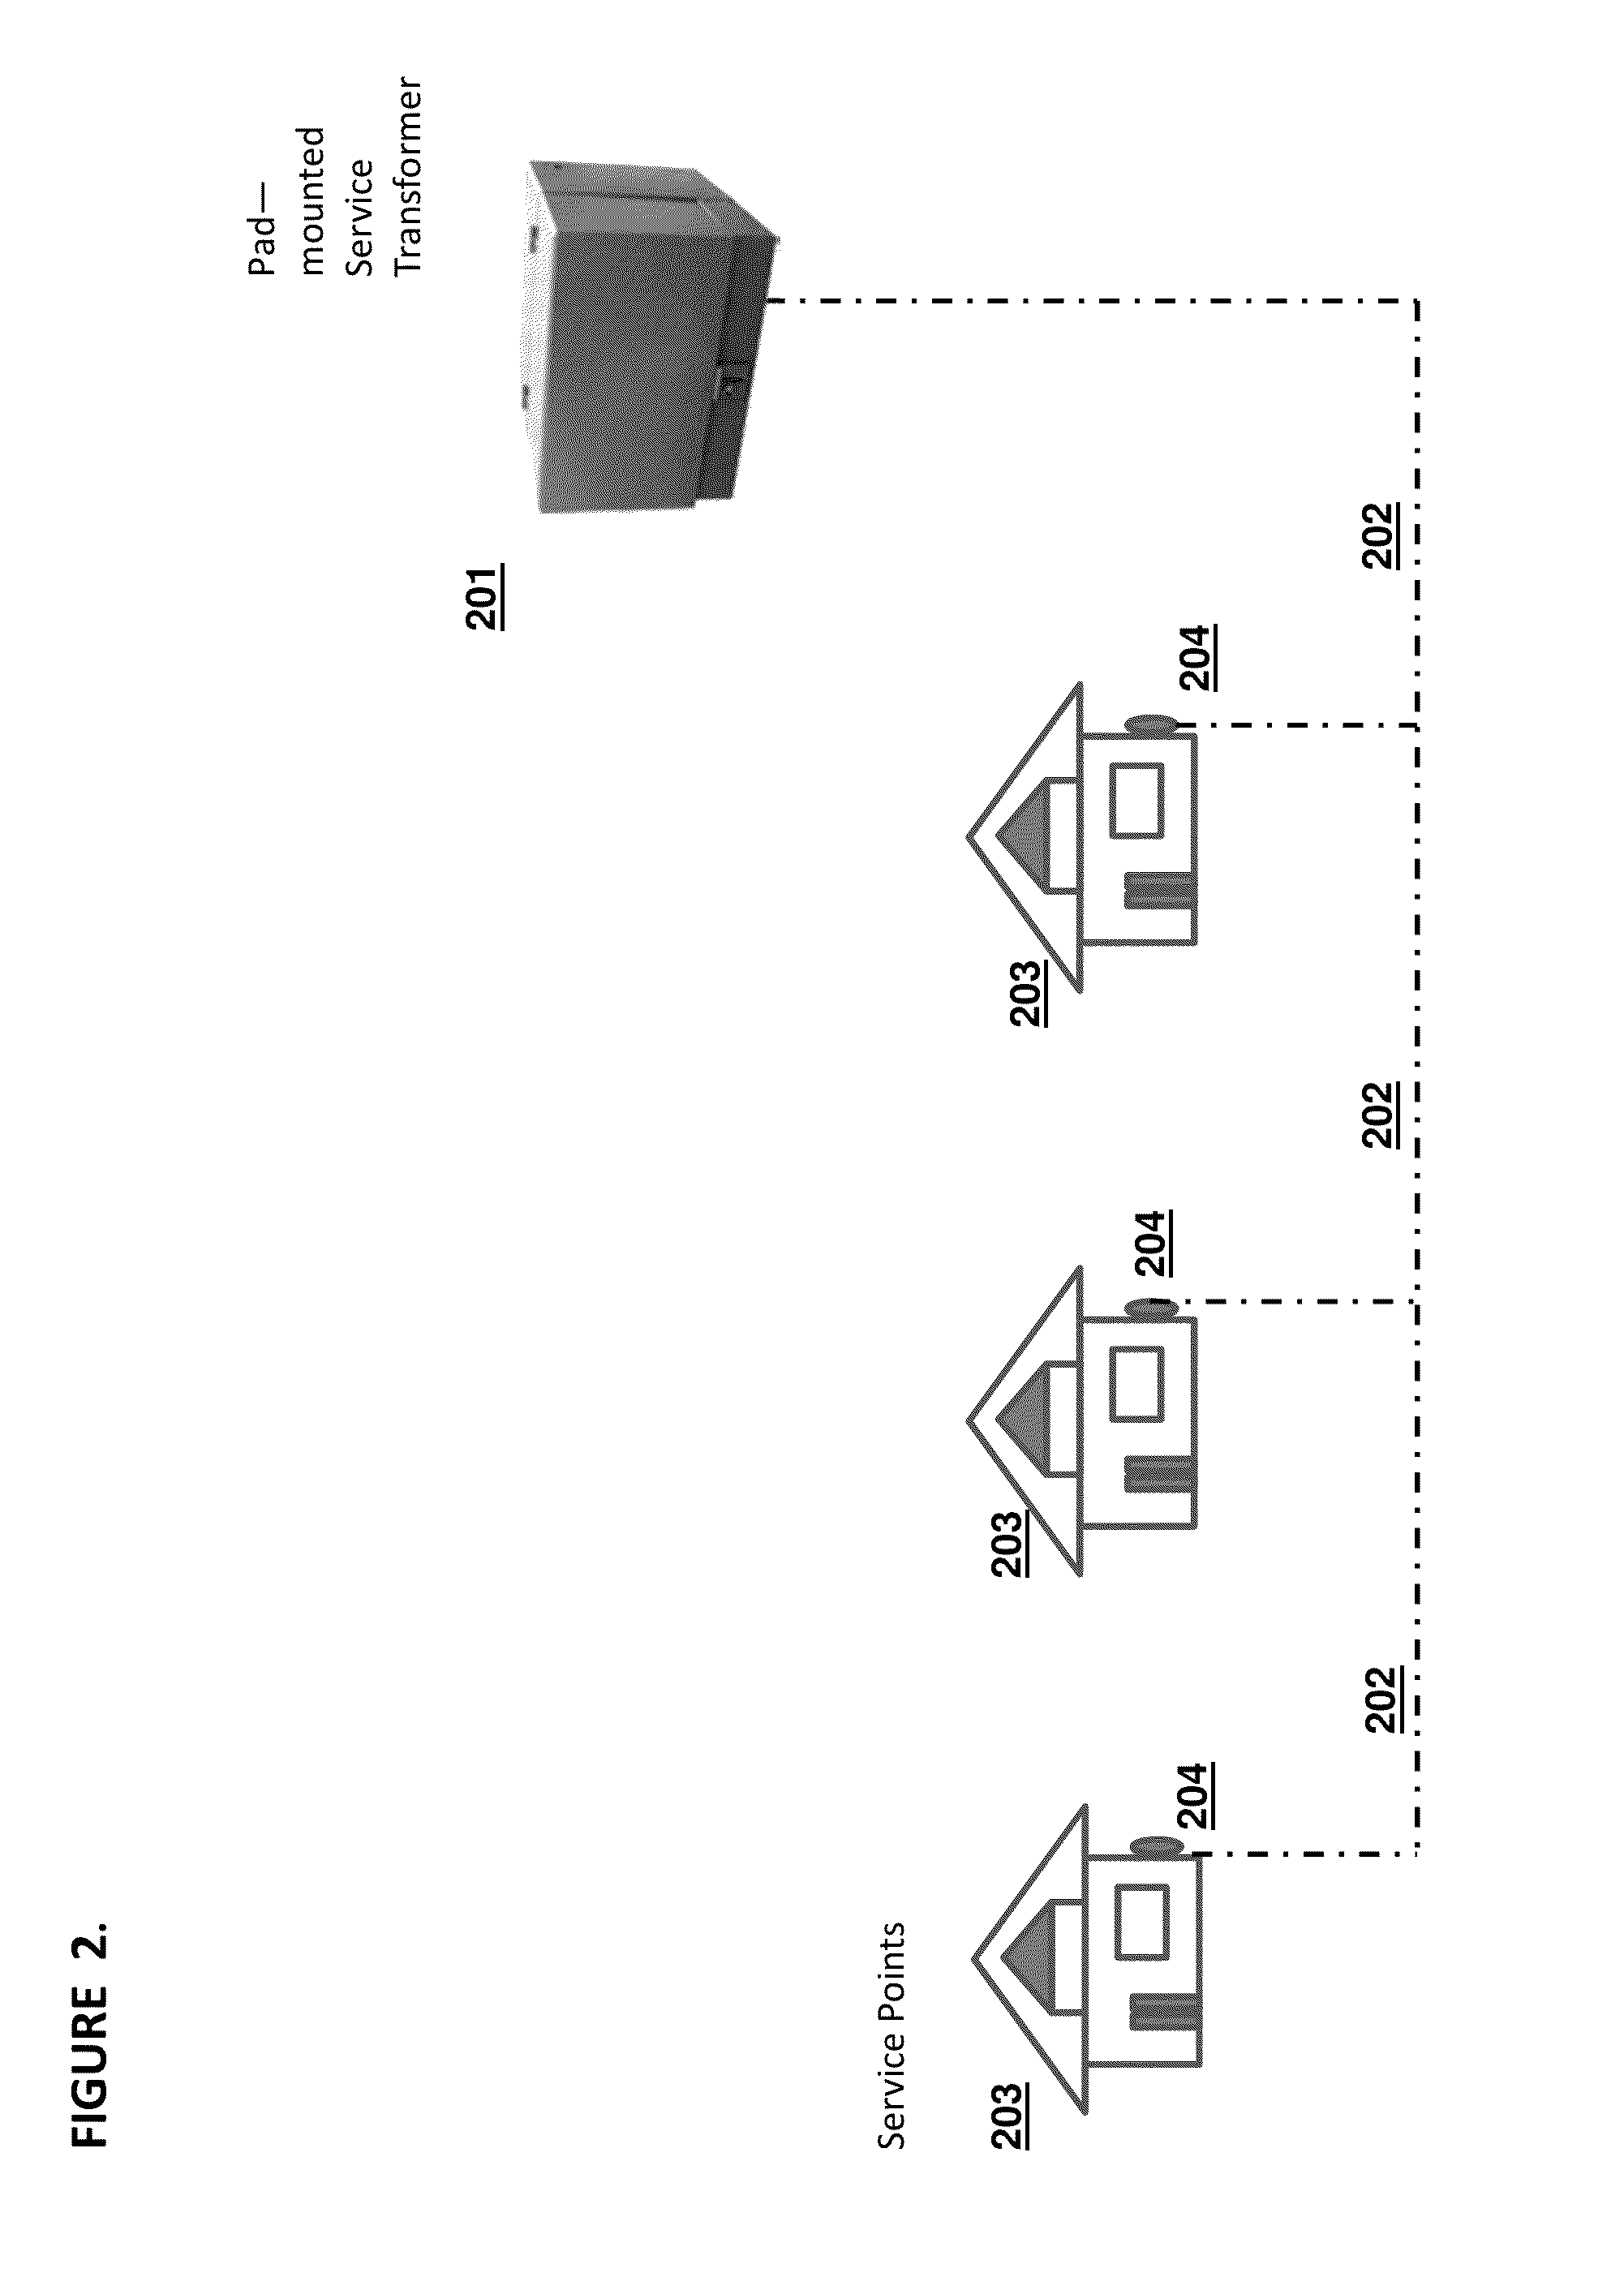 System and method for inferring schematic relationships between load points and service transformers